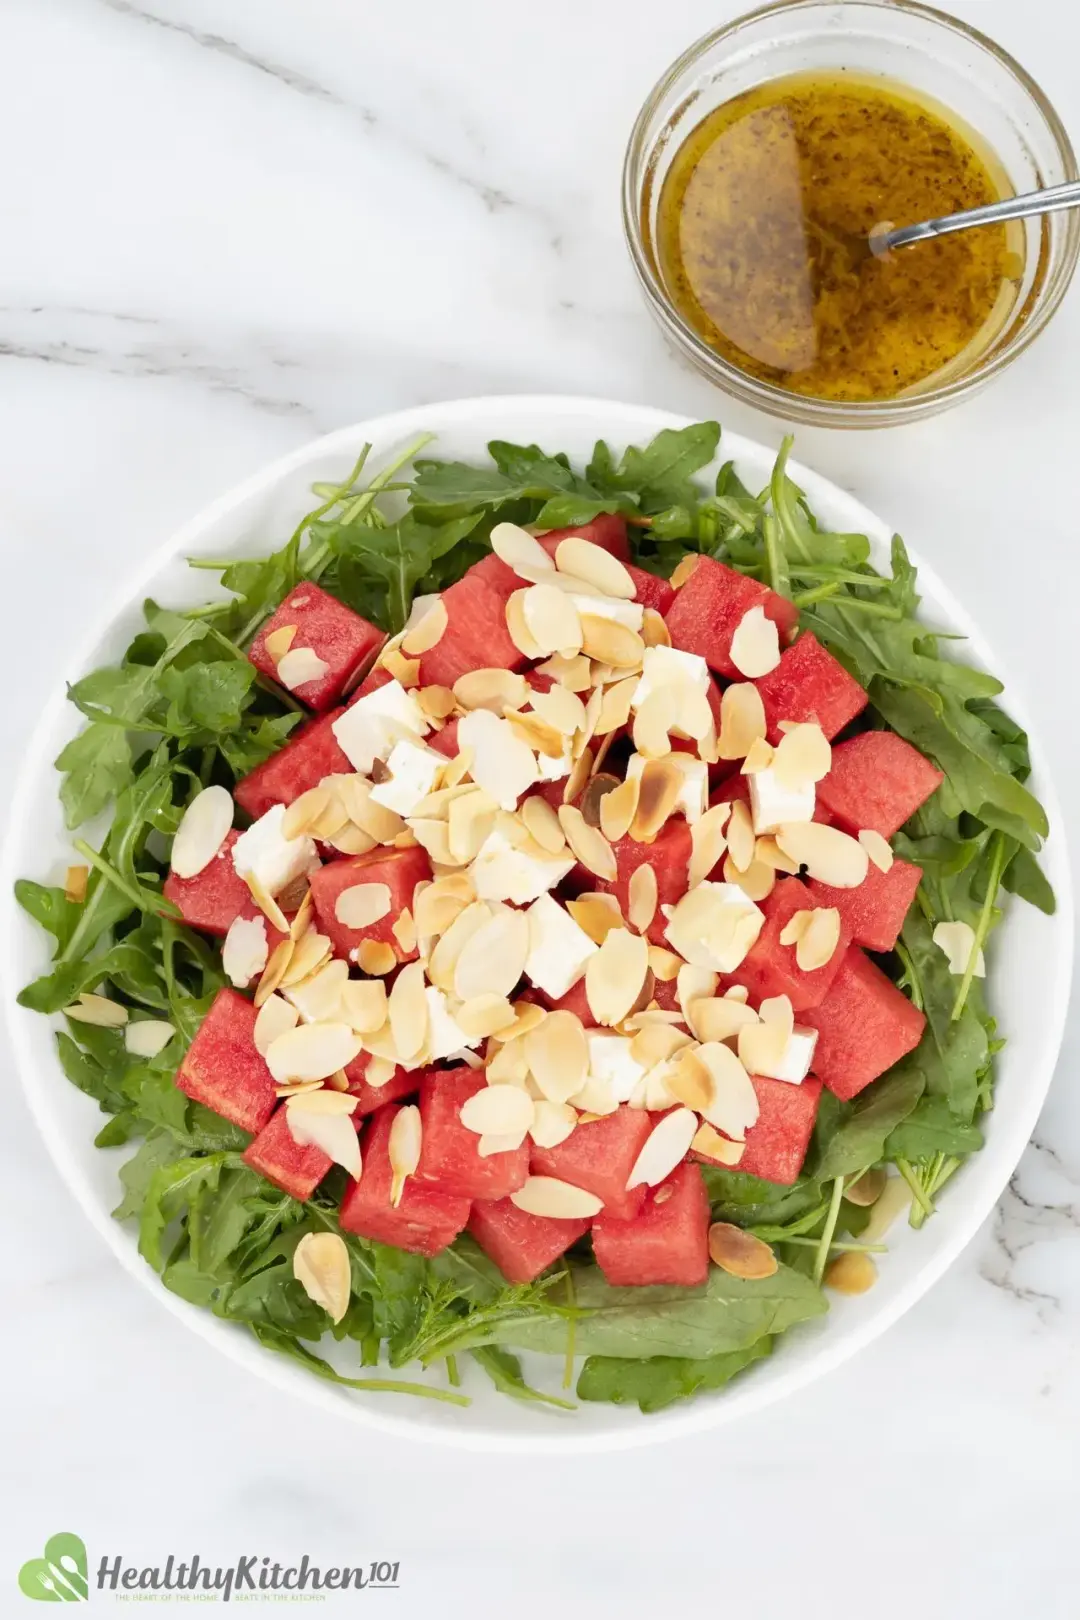 A plate of watermelon cubes and arugula salad, topped with feta and slices of almond, put next to dressing